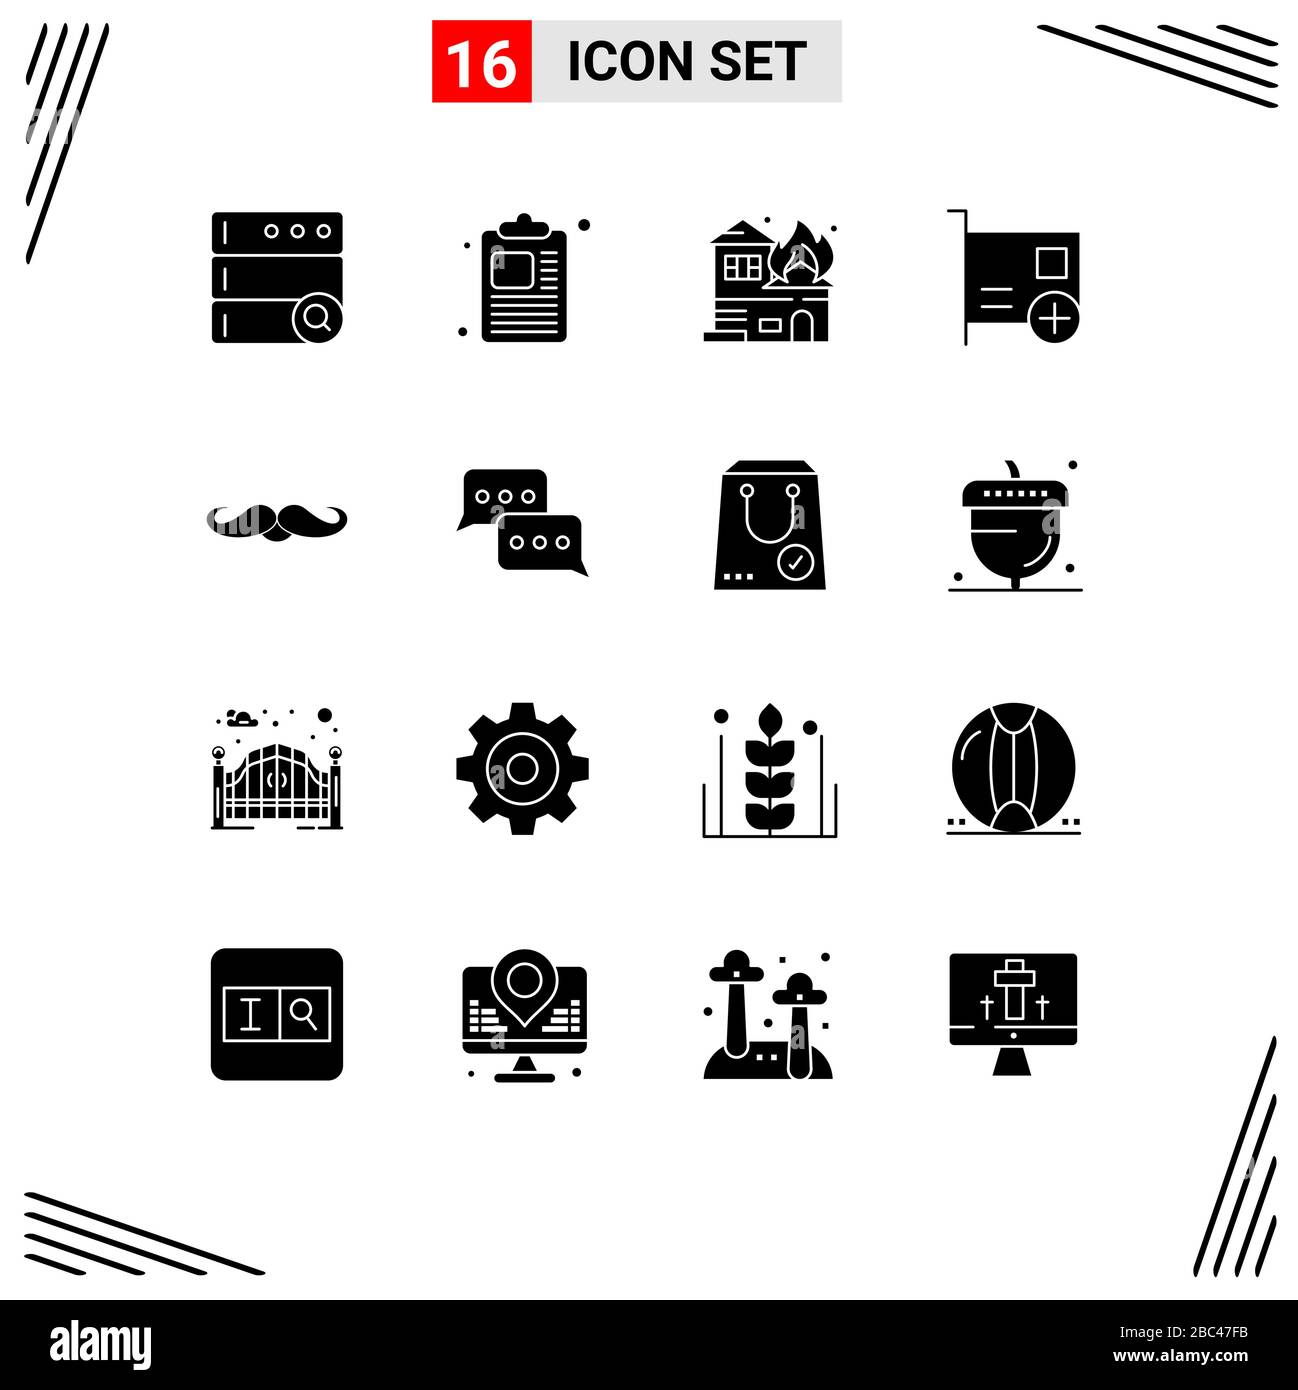 Universal Icon Symbols Group of 16 Modern Solid Glyphs of movember, moustache, fire, hardware, computers Editable Vector Design Elements Stock Vector